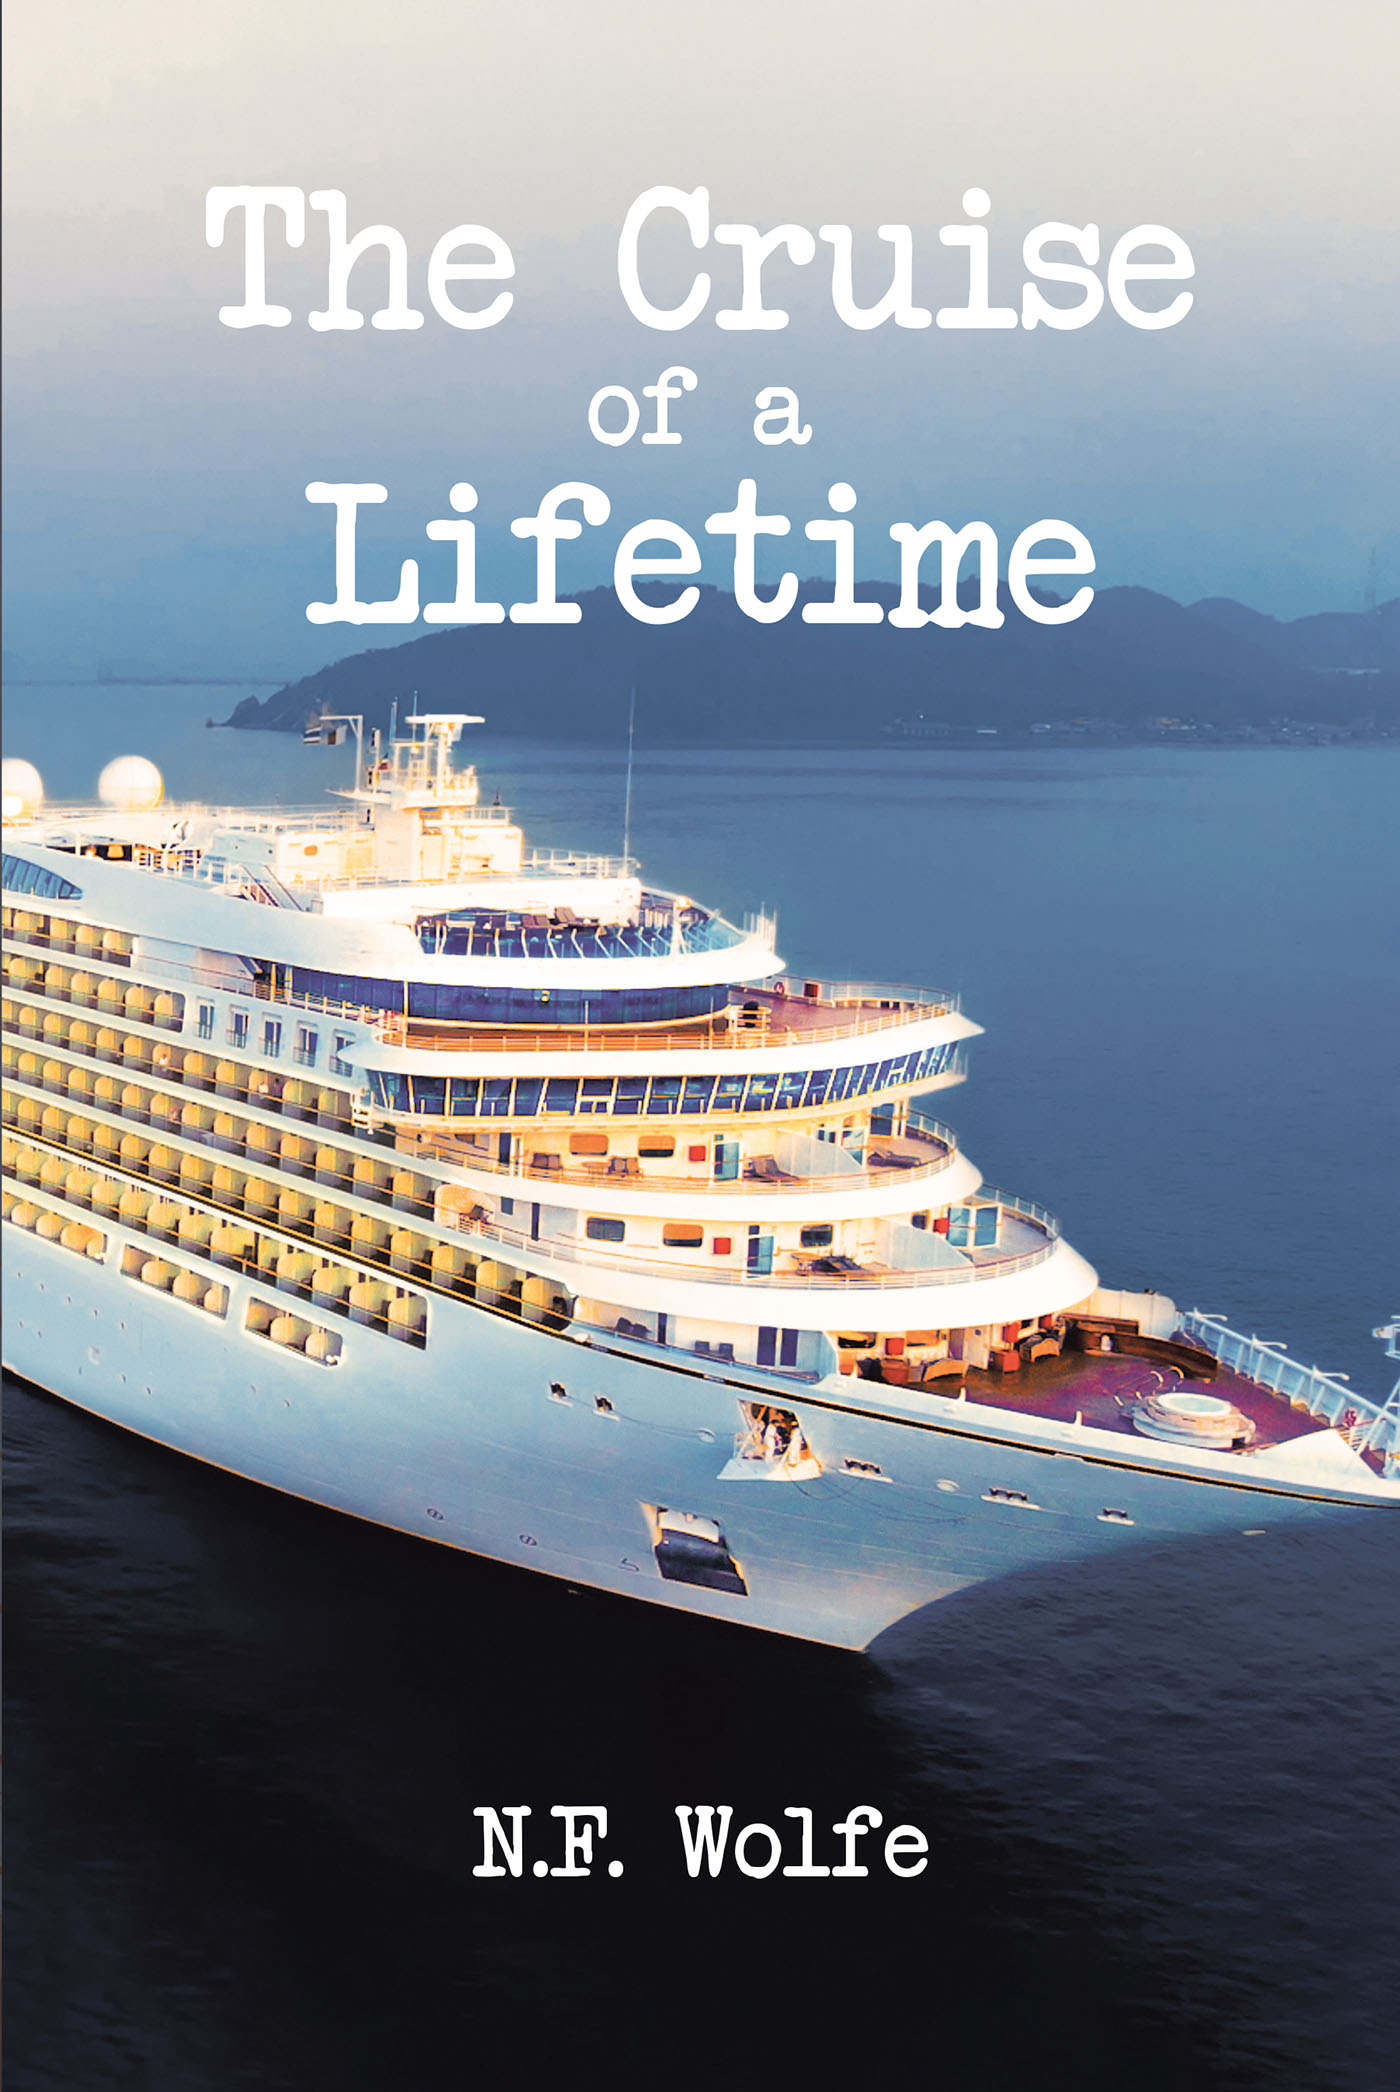 Author N.F. Wolfe’s New Book "The Cruise of a Lifetime" is an Enthralling Tale Following Two Families Who Become Entangled in Stopping a Dangerous Plot While on Vacation